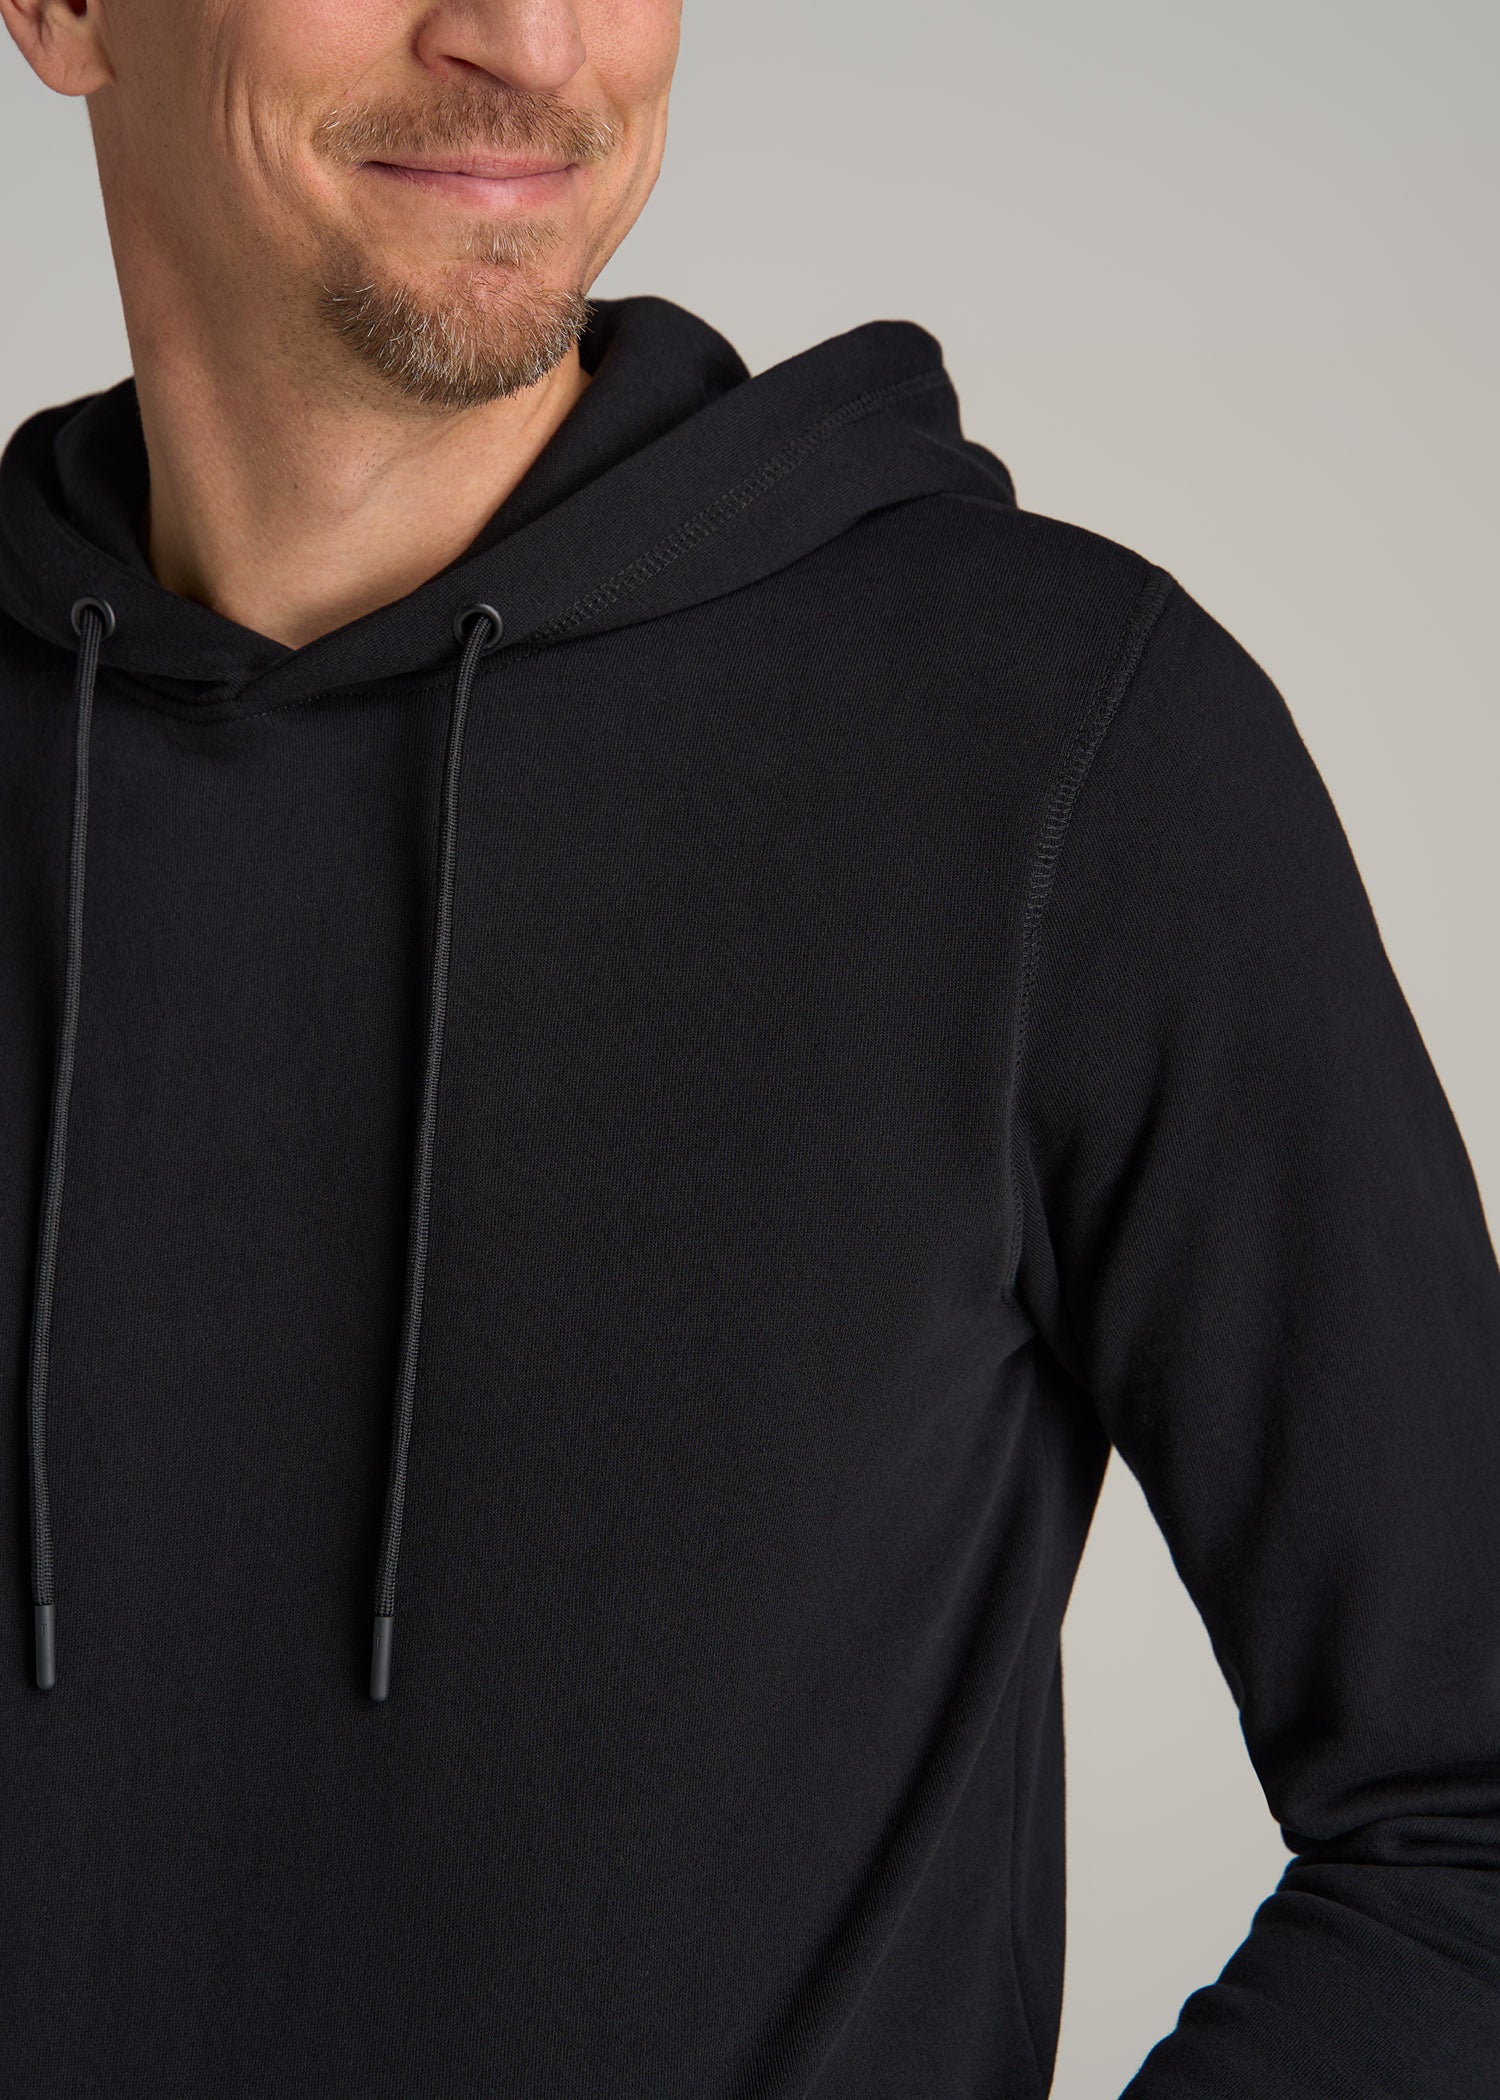 Pullover Hoodie Without Pockets